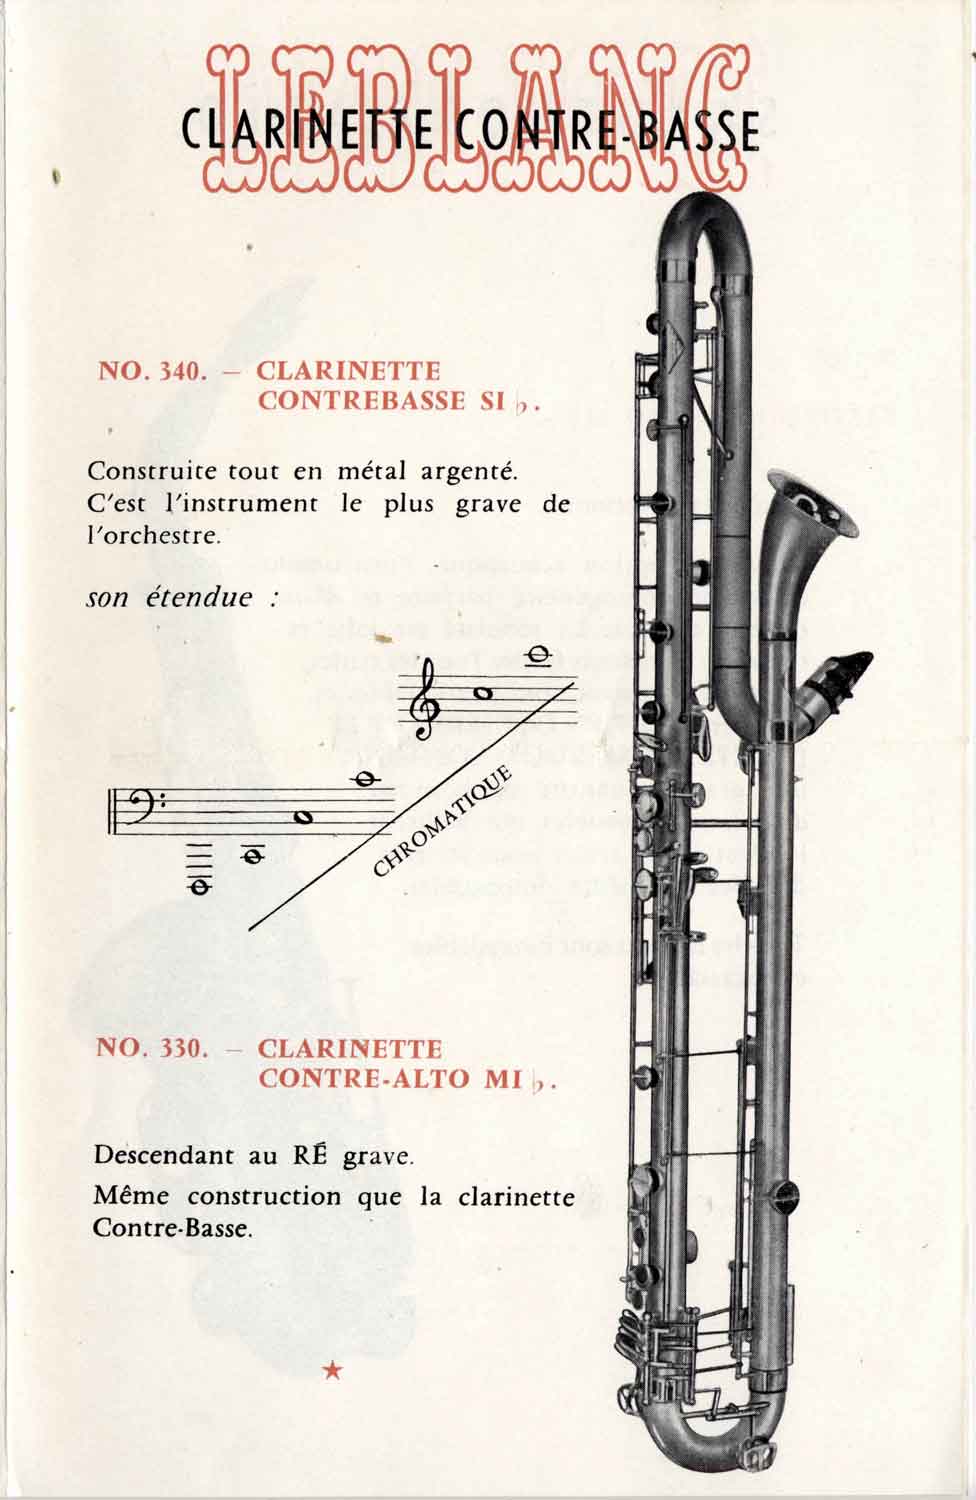 Valentin cases : Leblanc poster showing the contrabass clarinet.